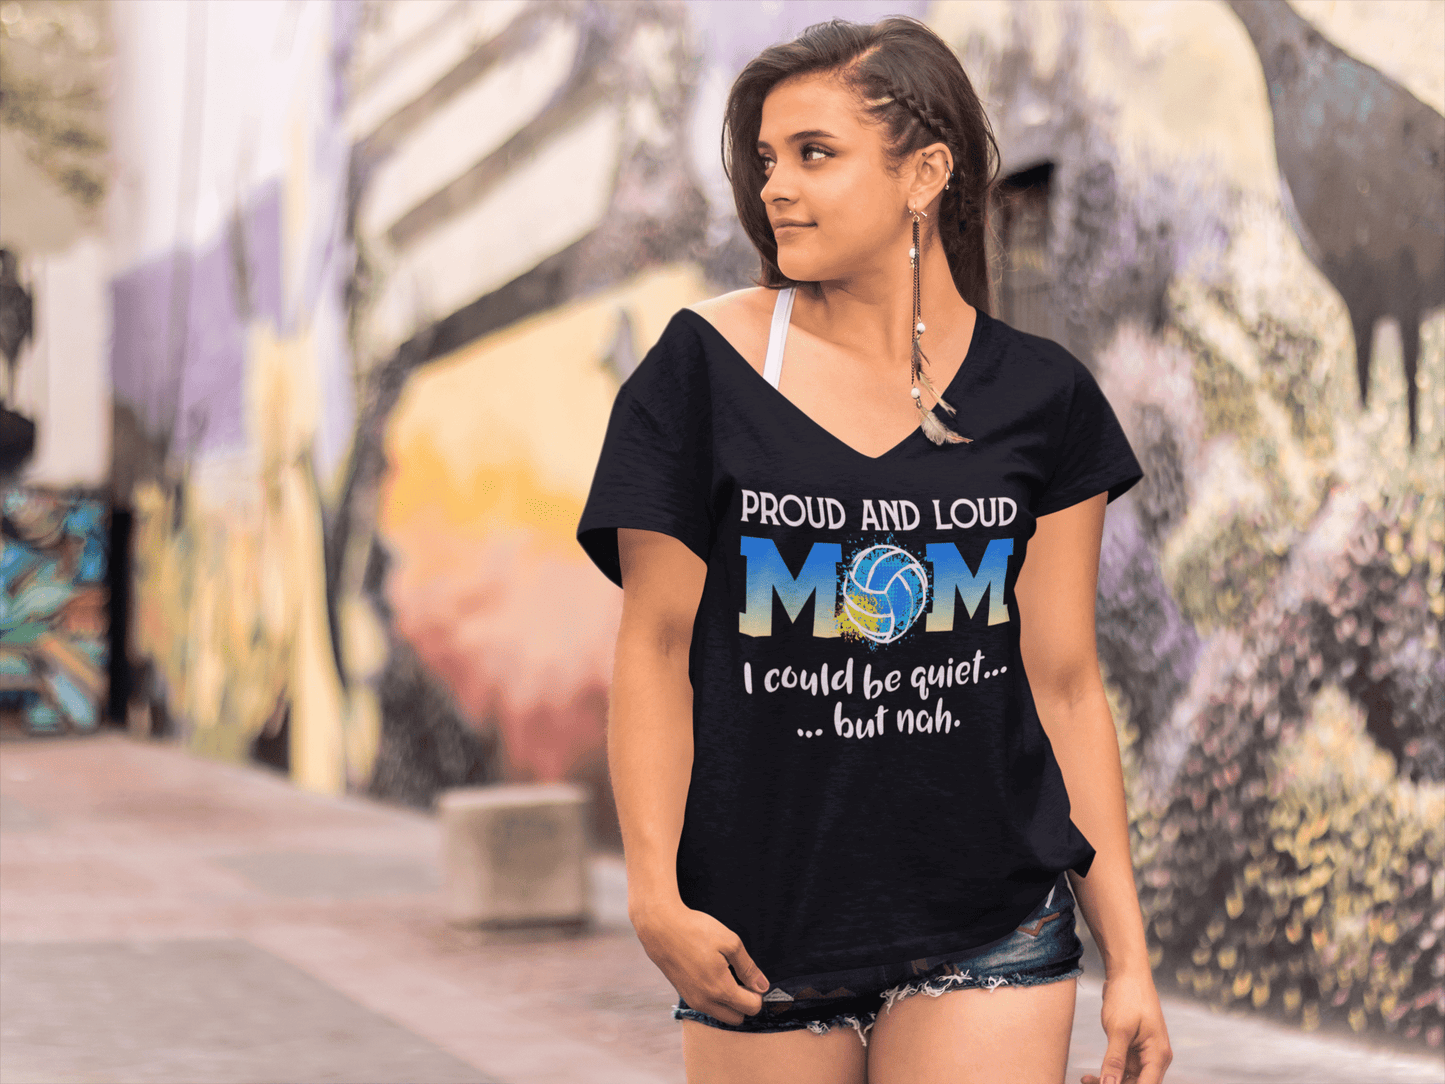 ULTRABASIC Women's V-Neck T-Shirt Proud and Loud Mom - Funny Quote Volleyball